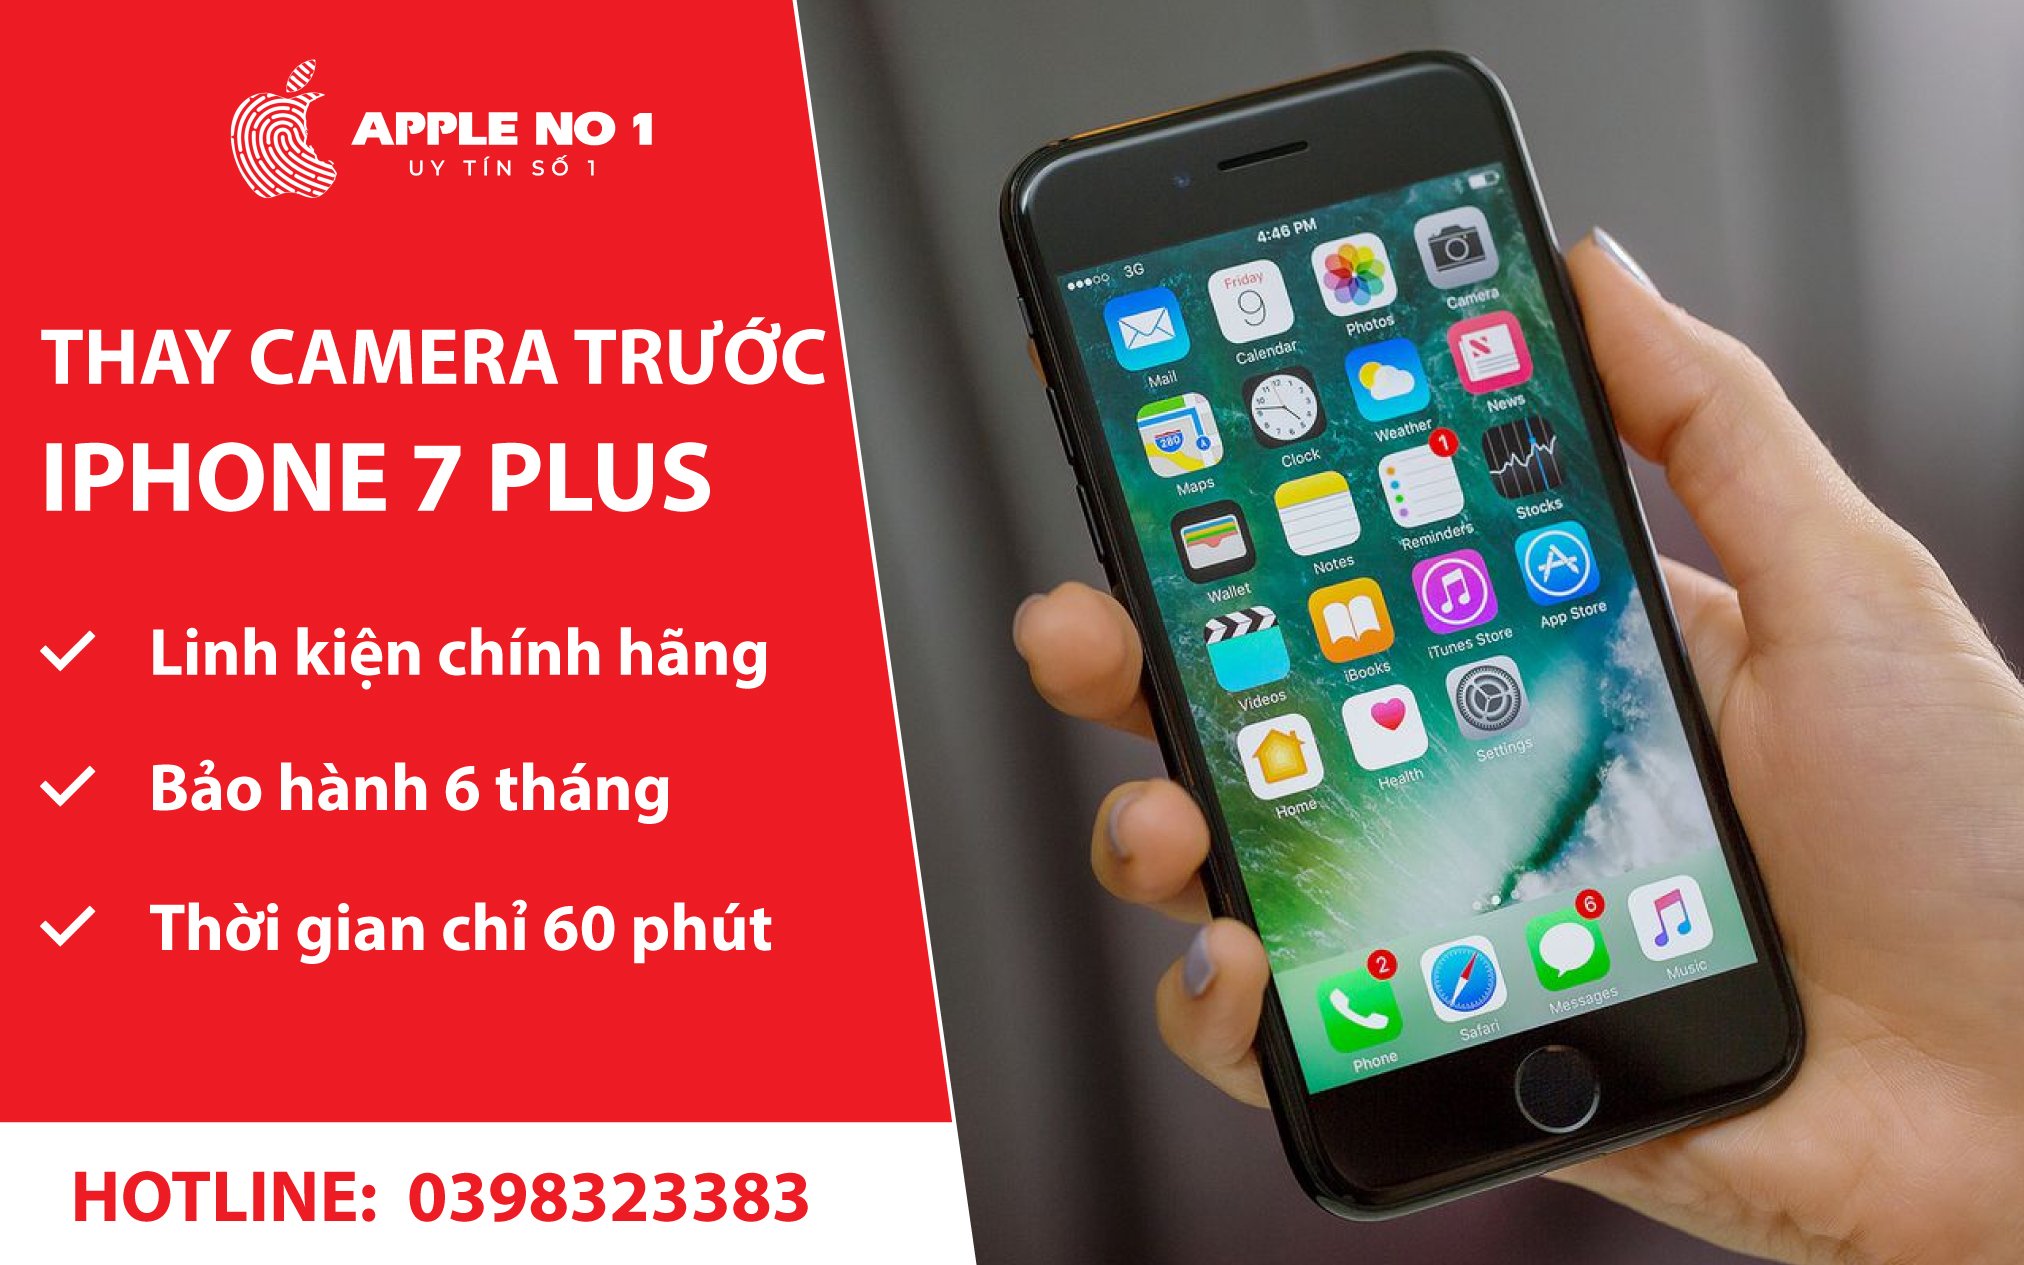 thay camera truoc iphone 7 plus uy tin, chat luong tai apple no.1